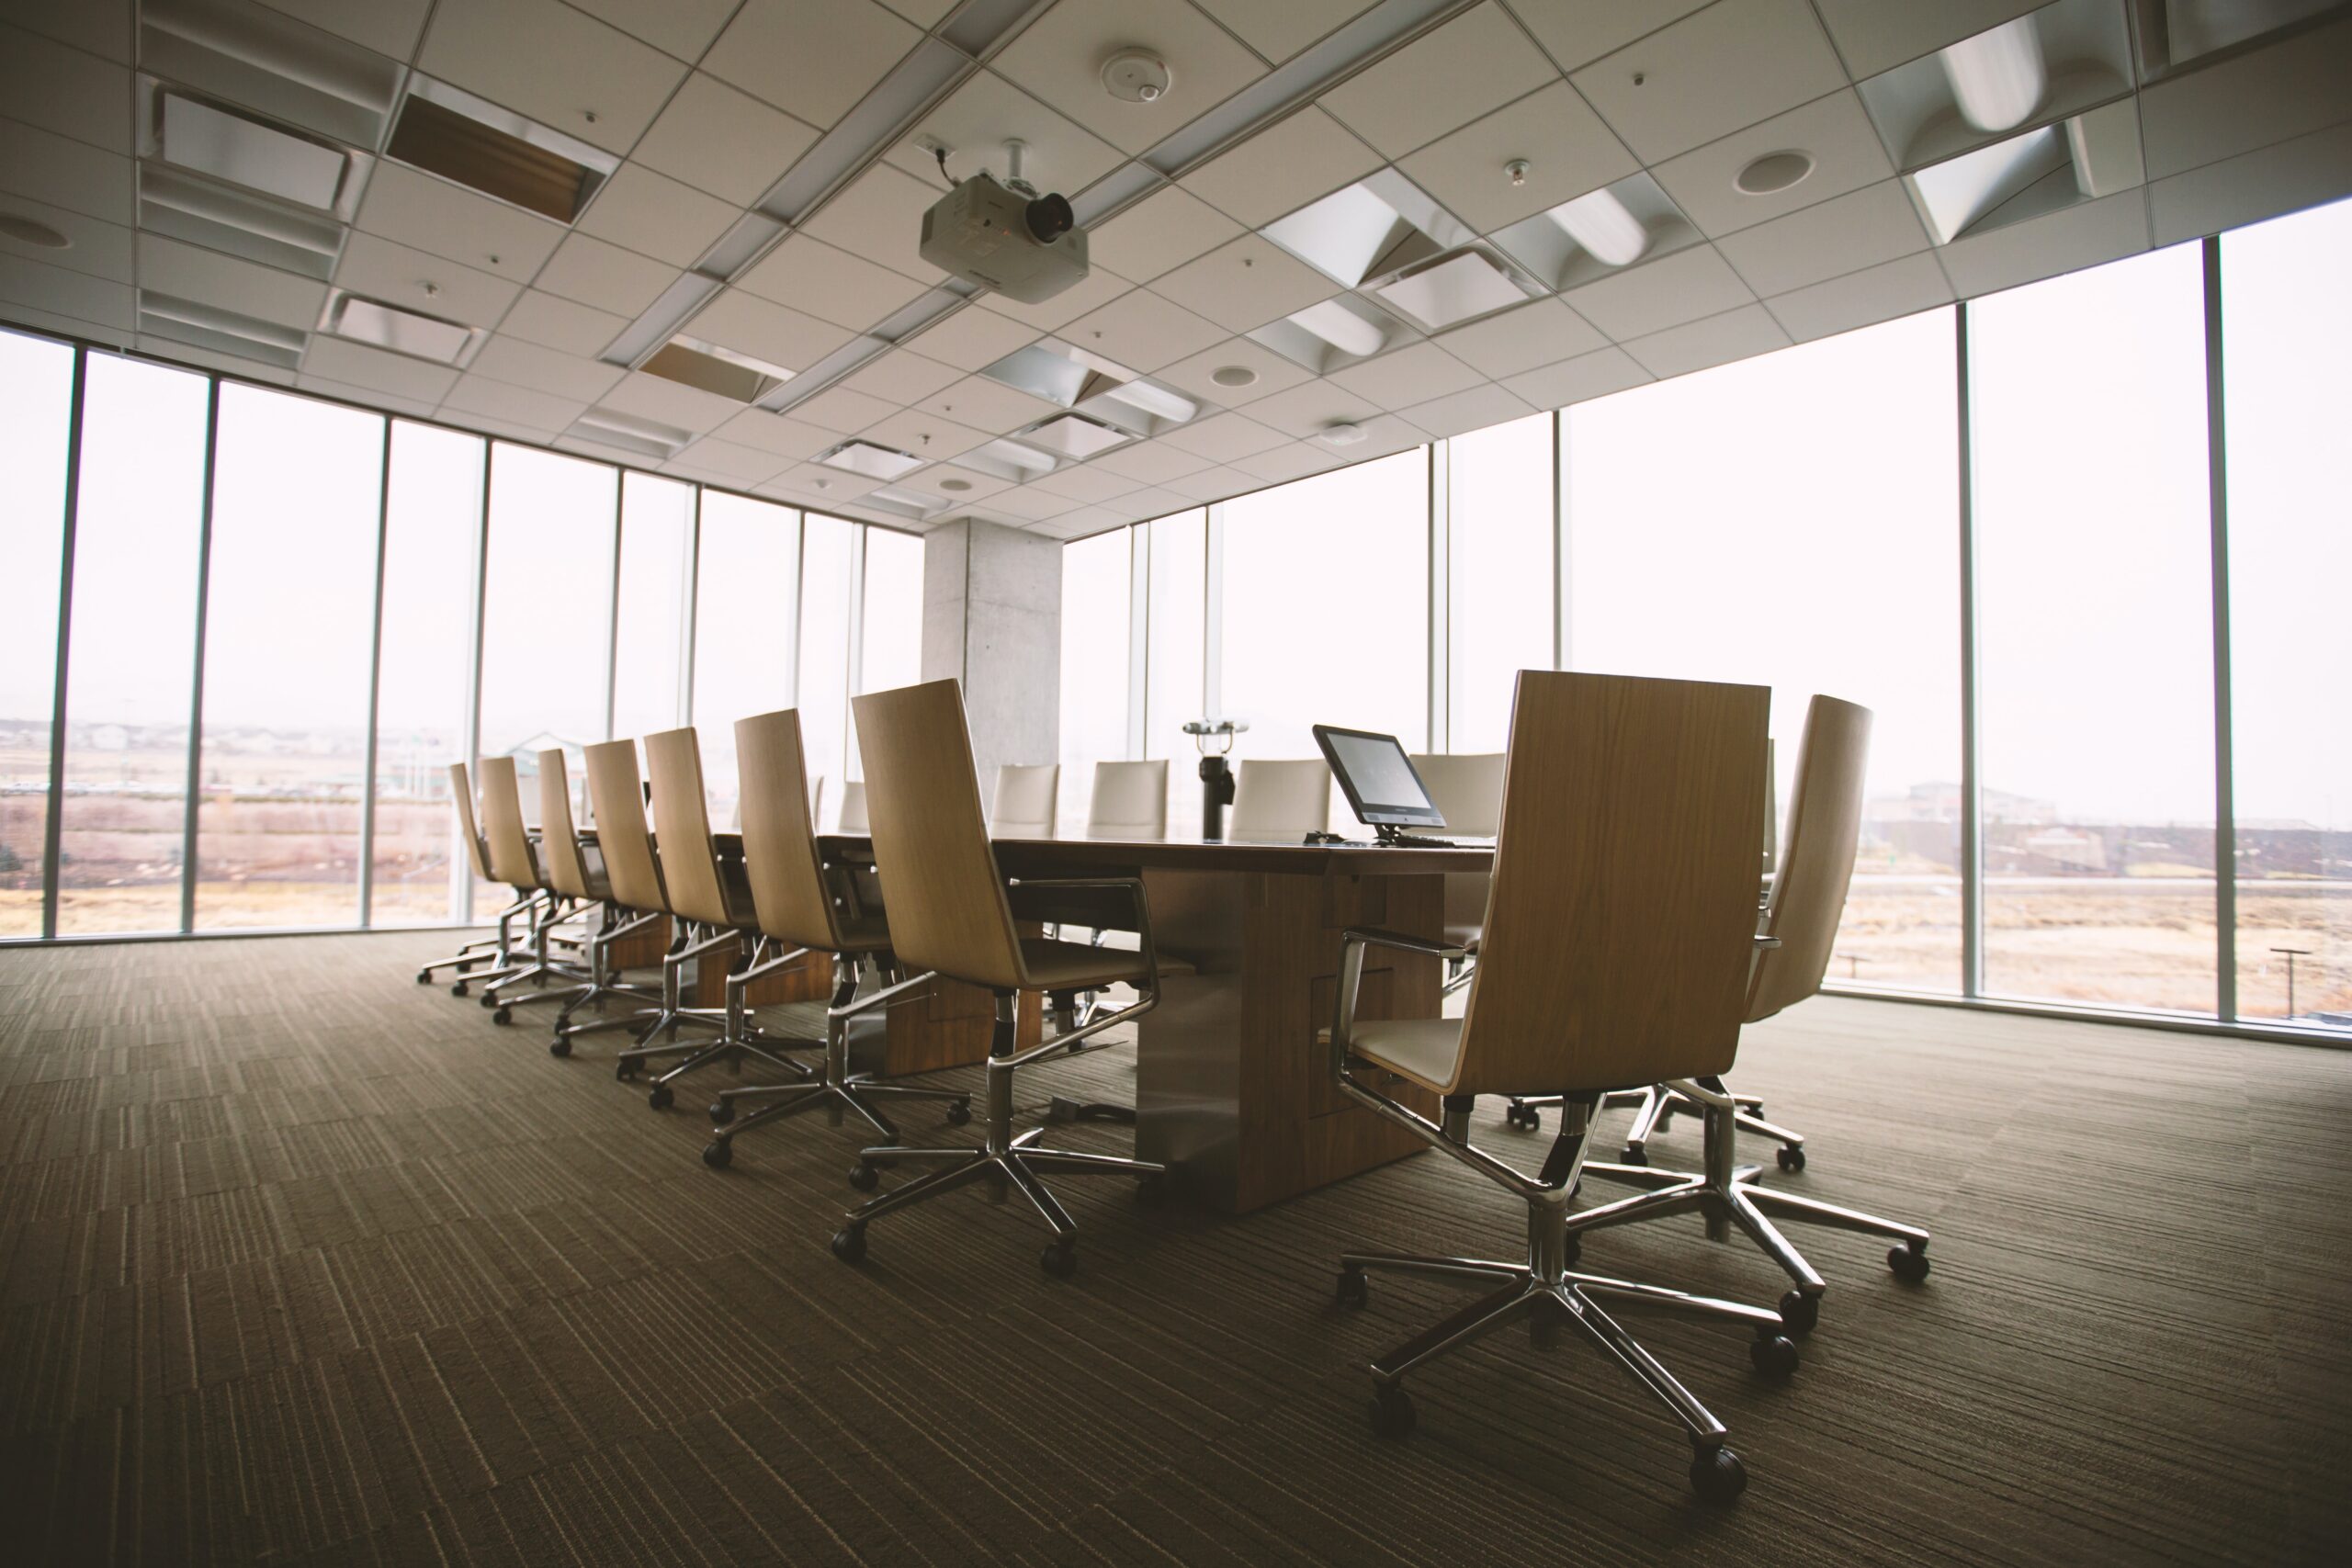 Ten Myths About Nonprofit Boards